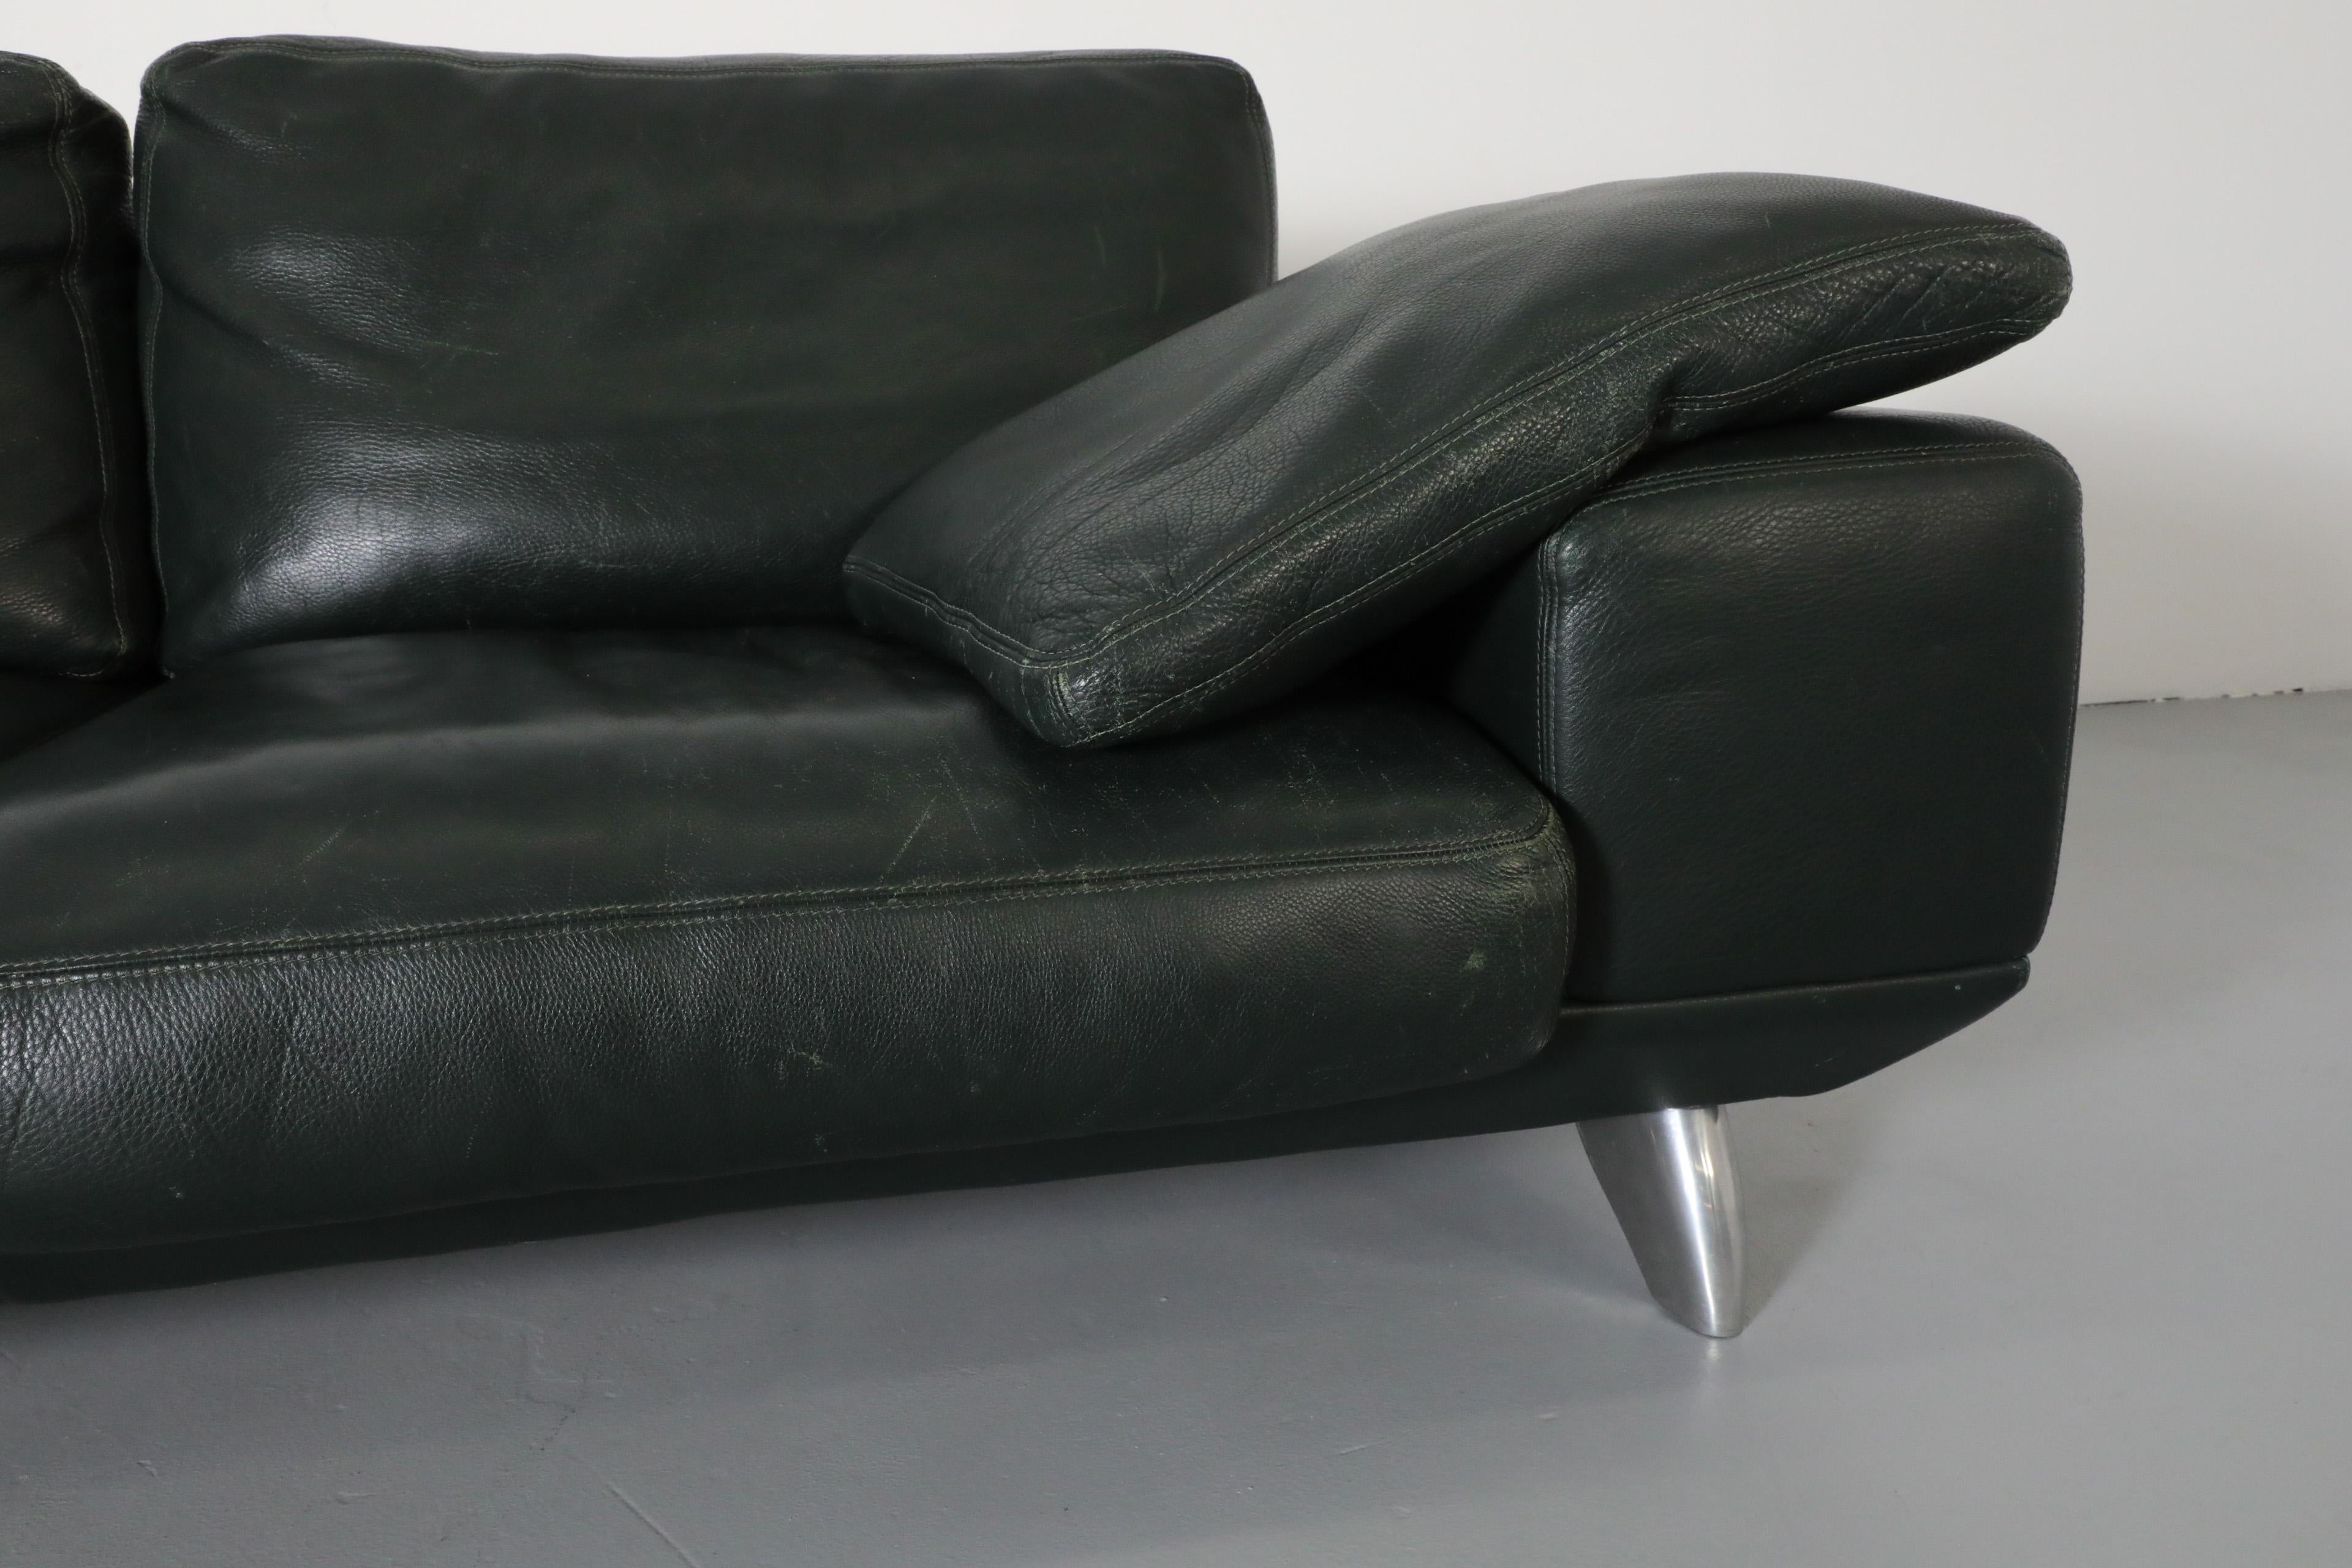 Handsome 80's Dark Green Leather Sofa by Molinari w/ Wide Arms & Metal Legs For Sale 11